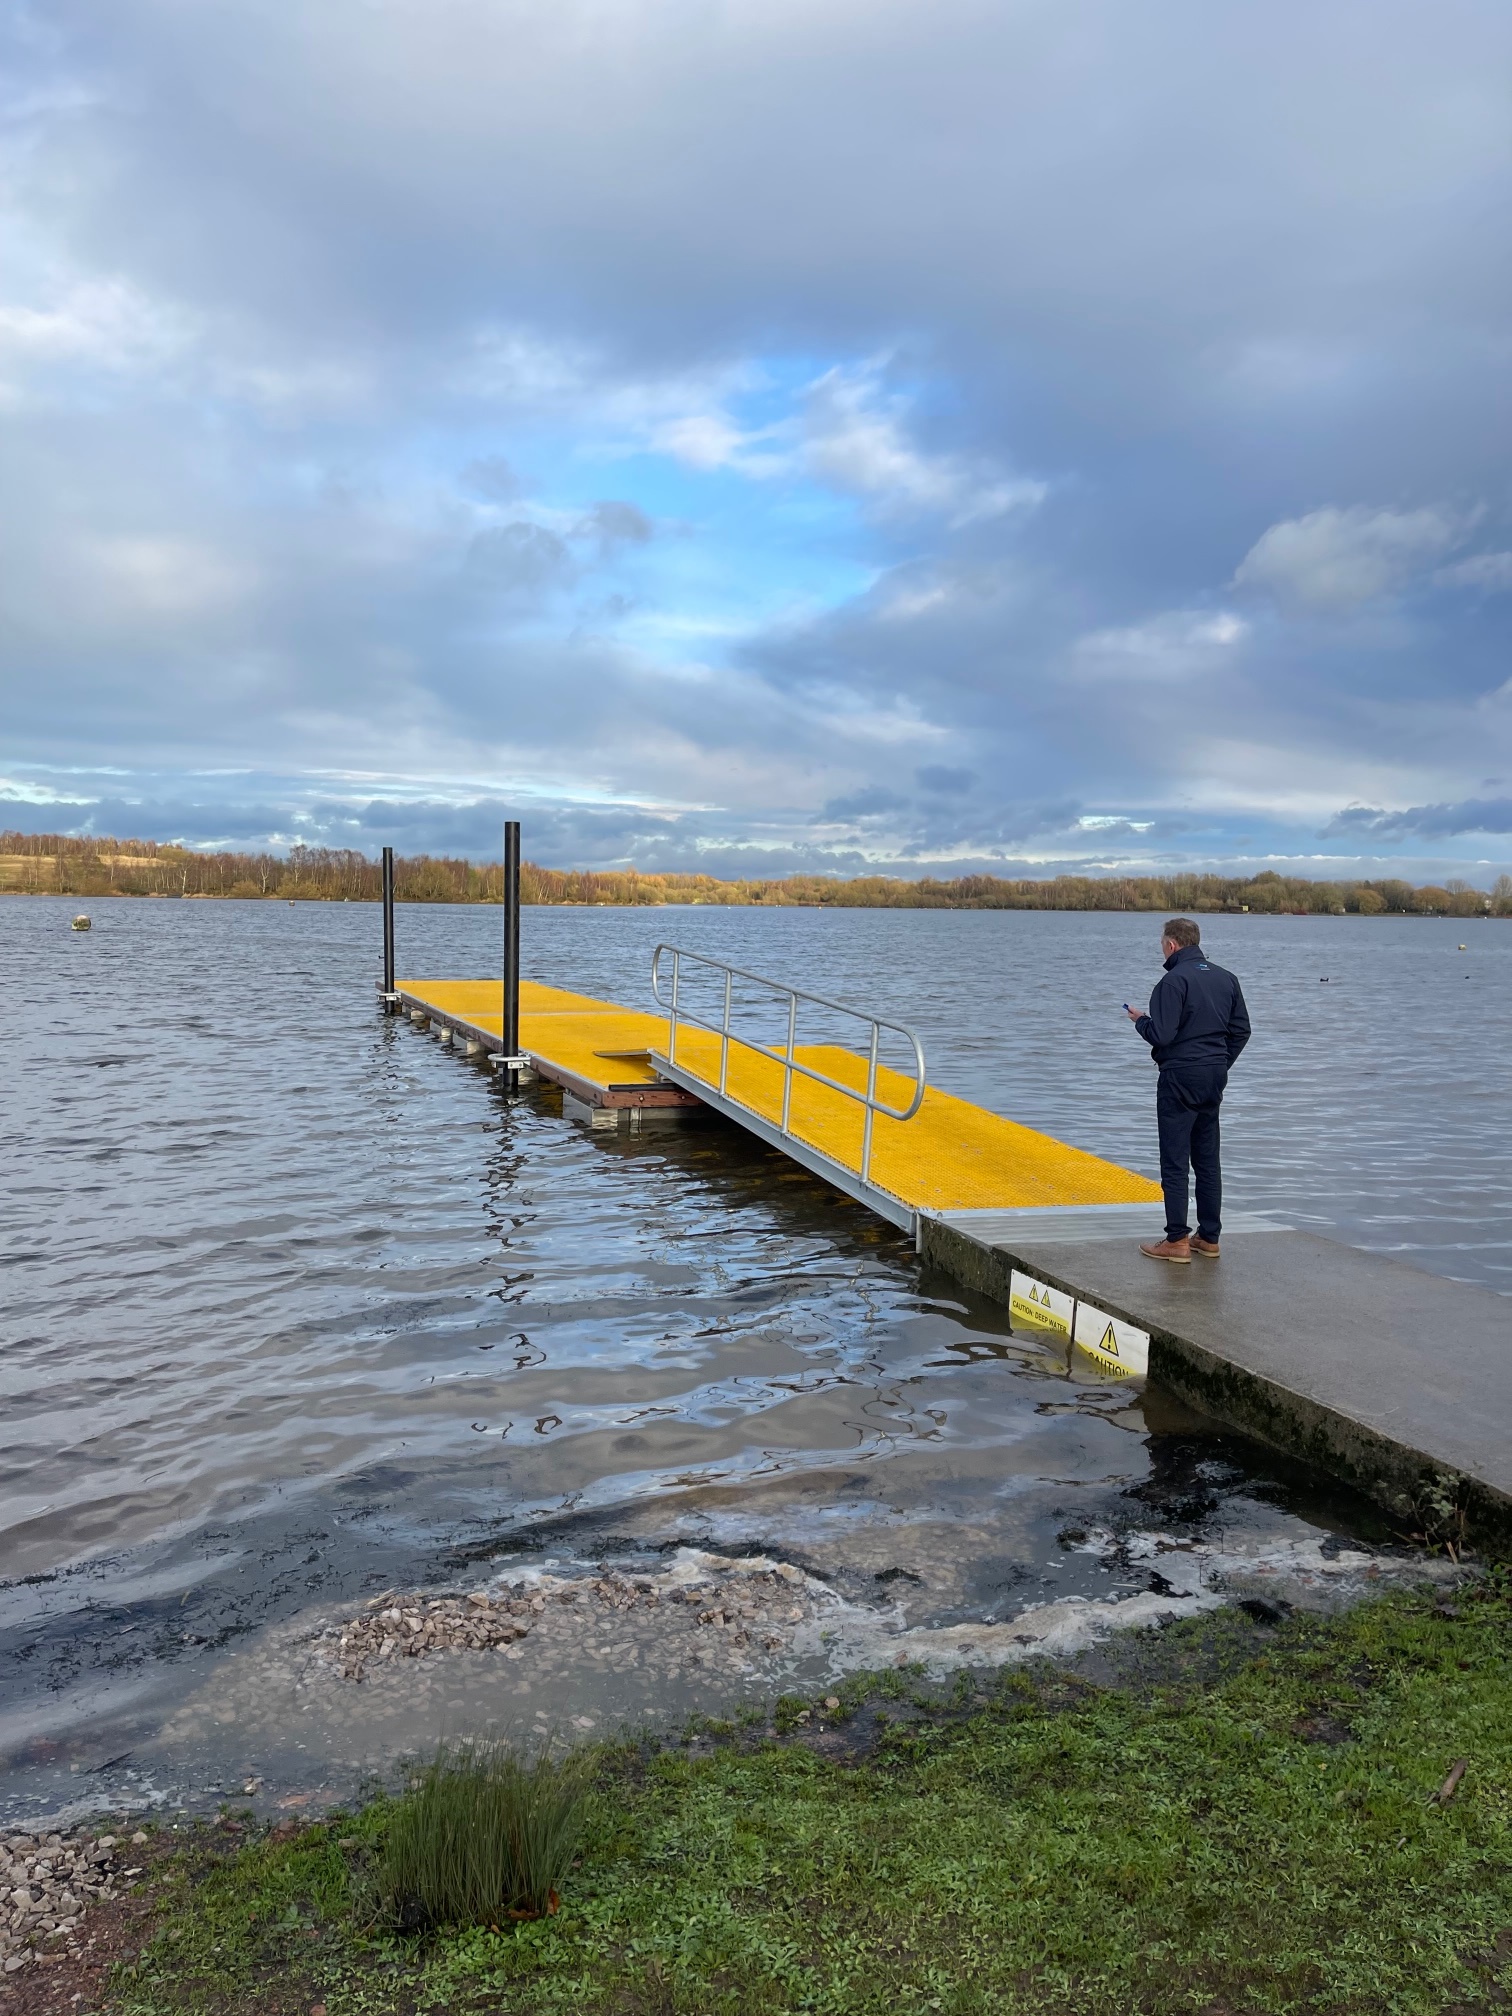 Person walking on yellow mini meshed GRP decked floating pontoon landscape view